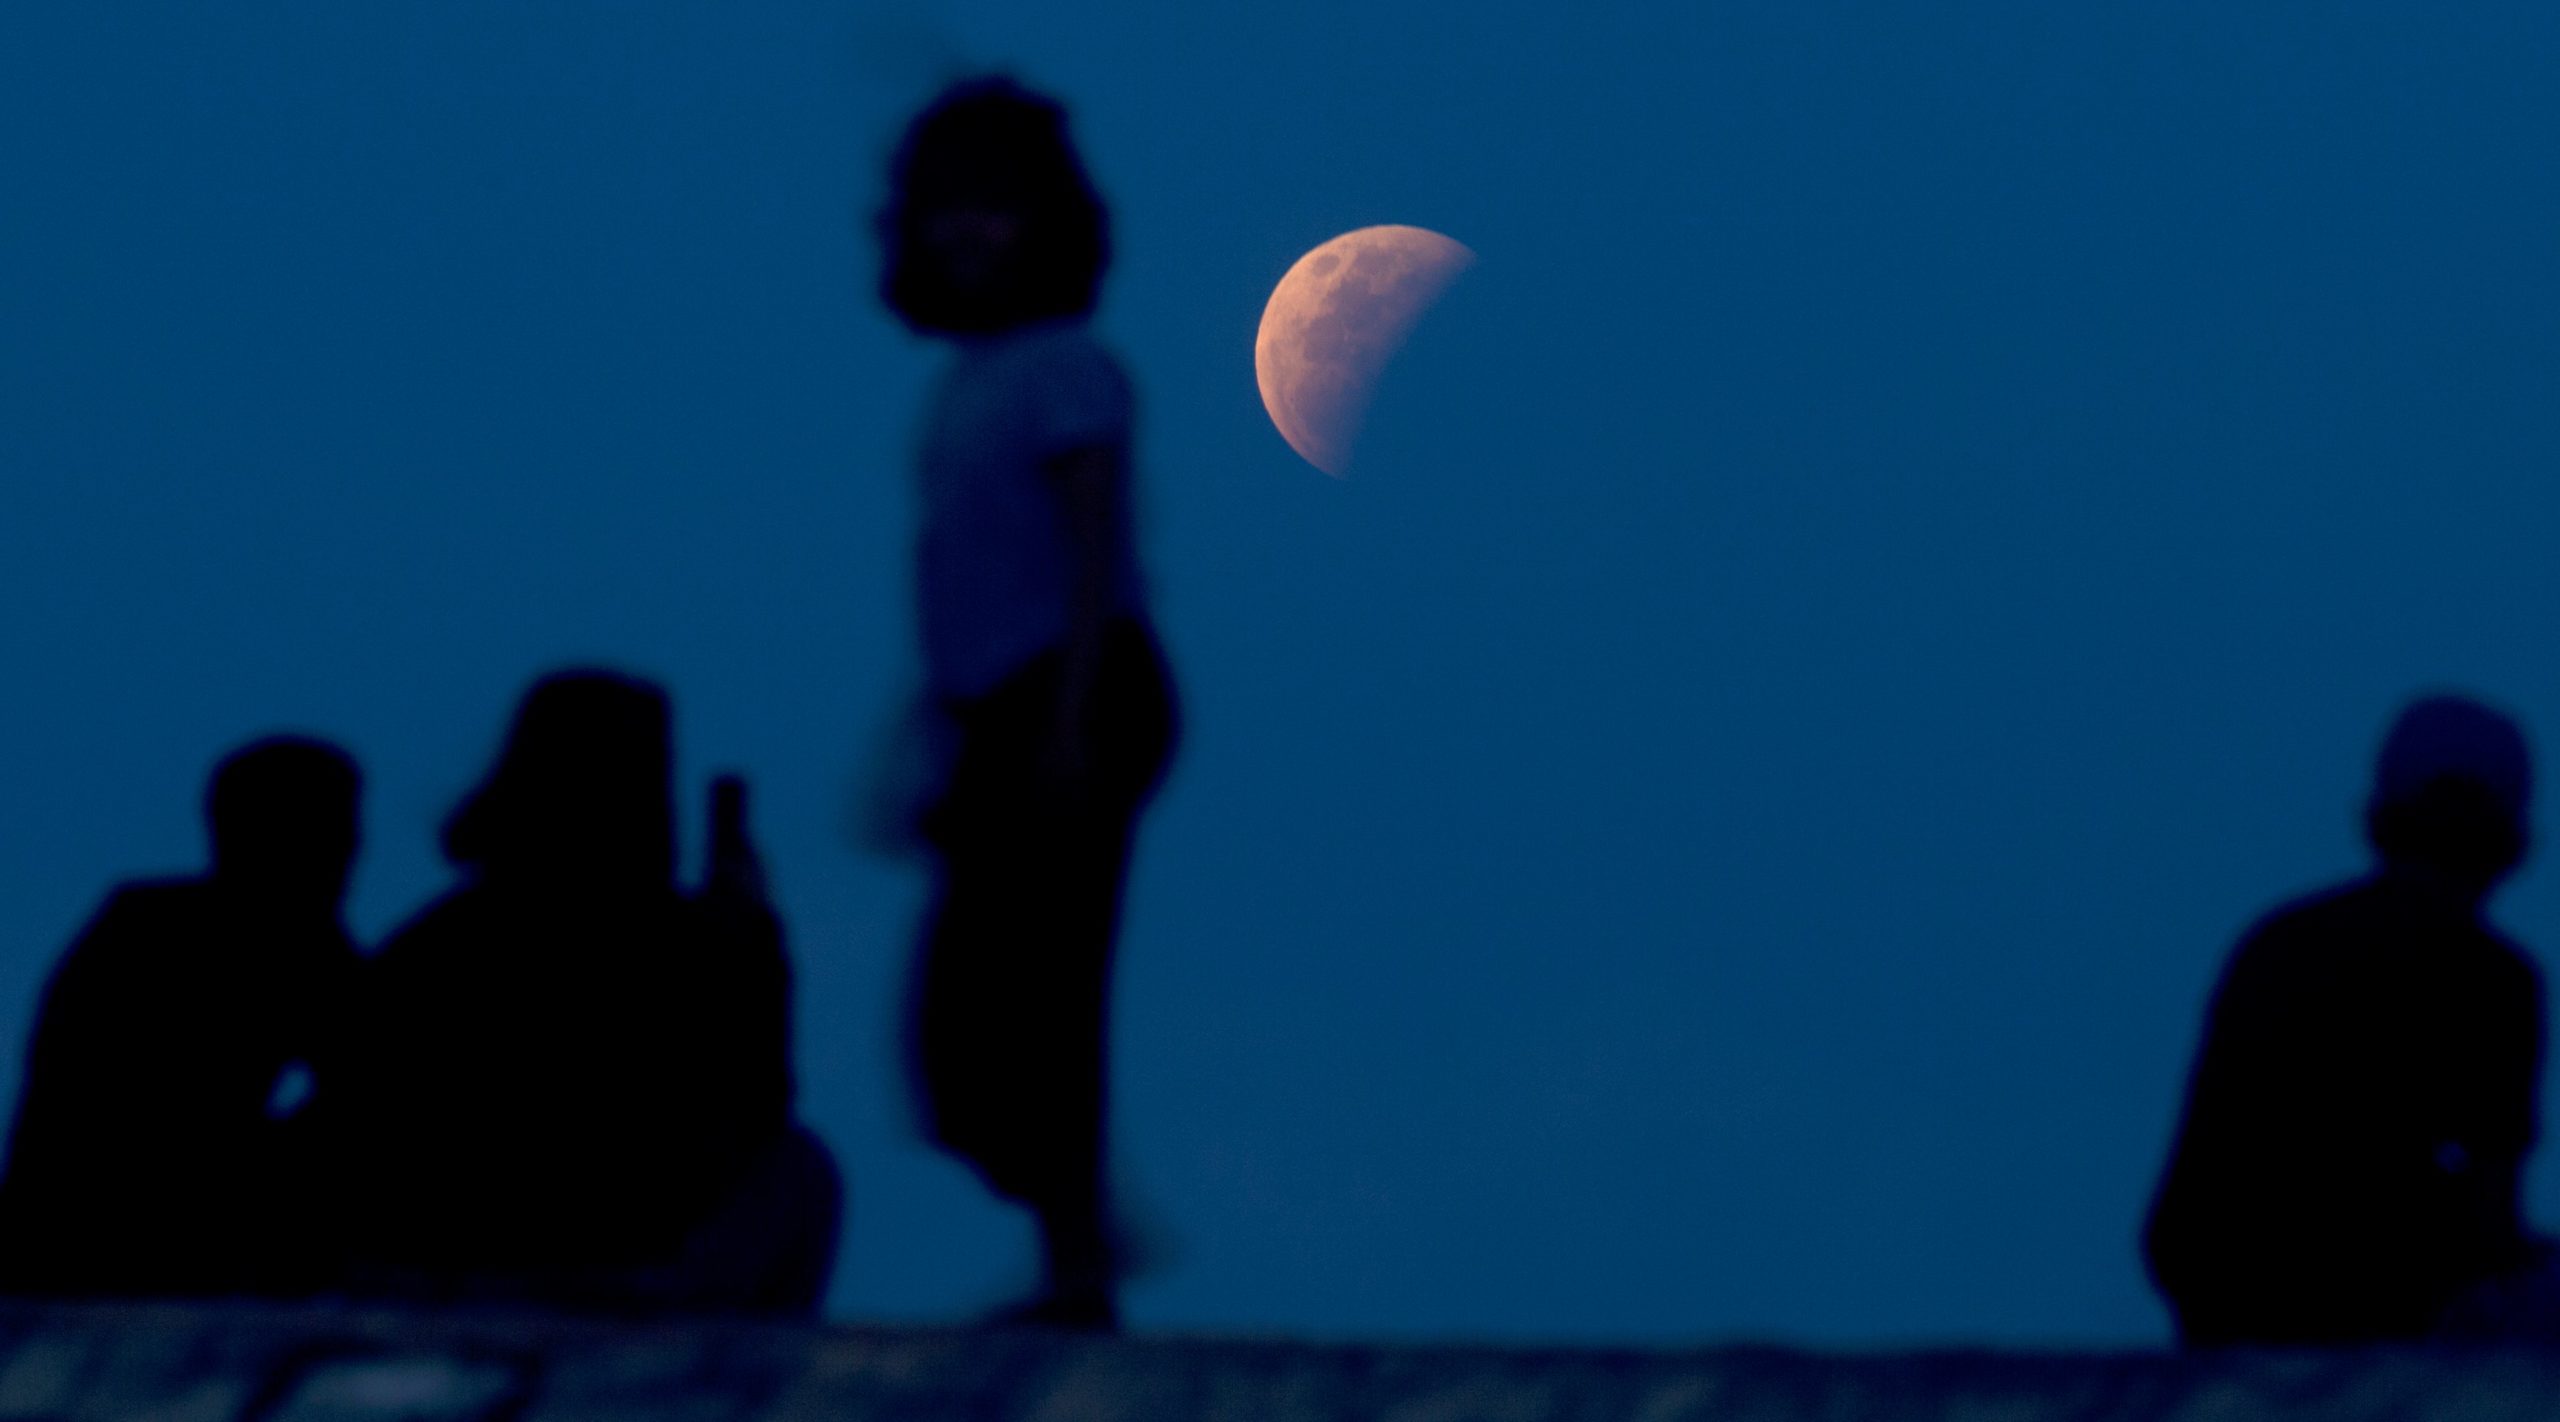 Residents watch the lunar eclipse at Sanur beach in Bali, Indonesia on Wednesday, May 26, 2021.  (Photo: Firdia Lisnawati, AP)